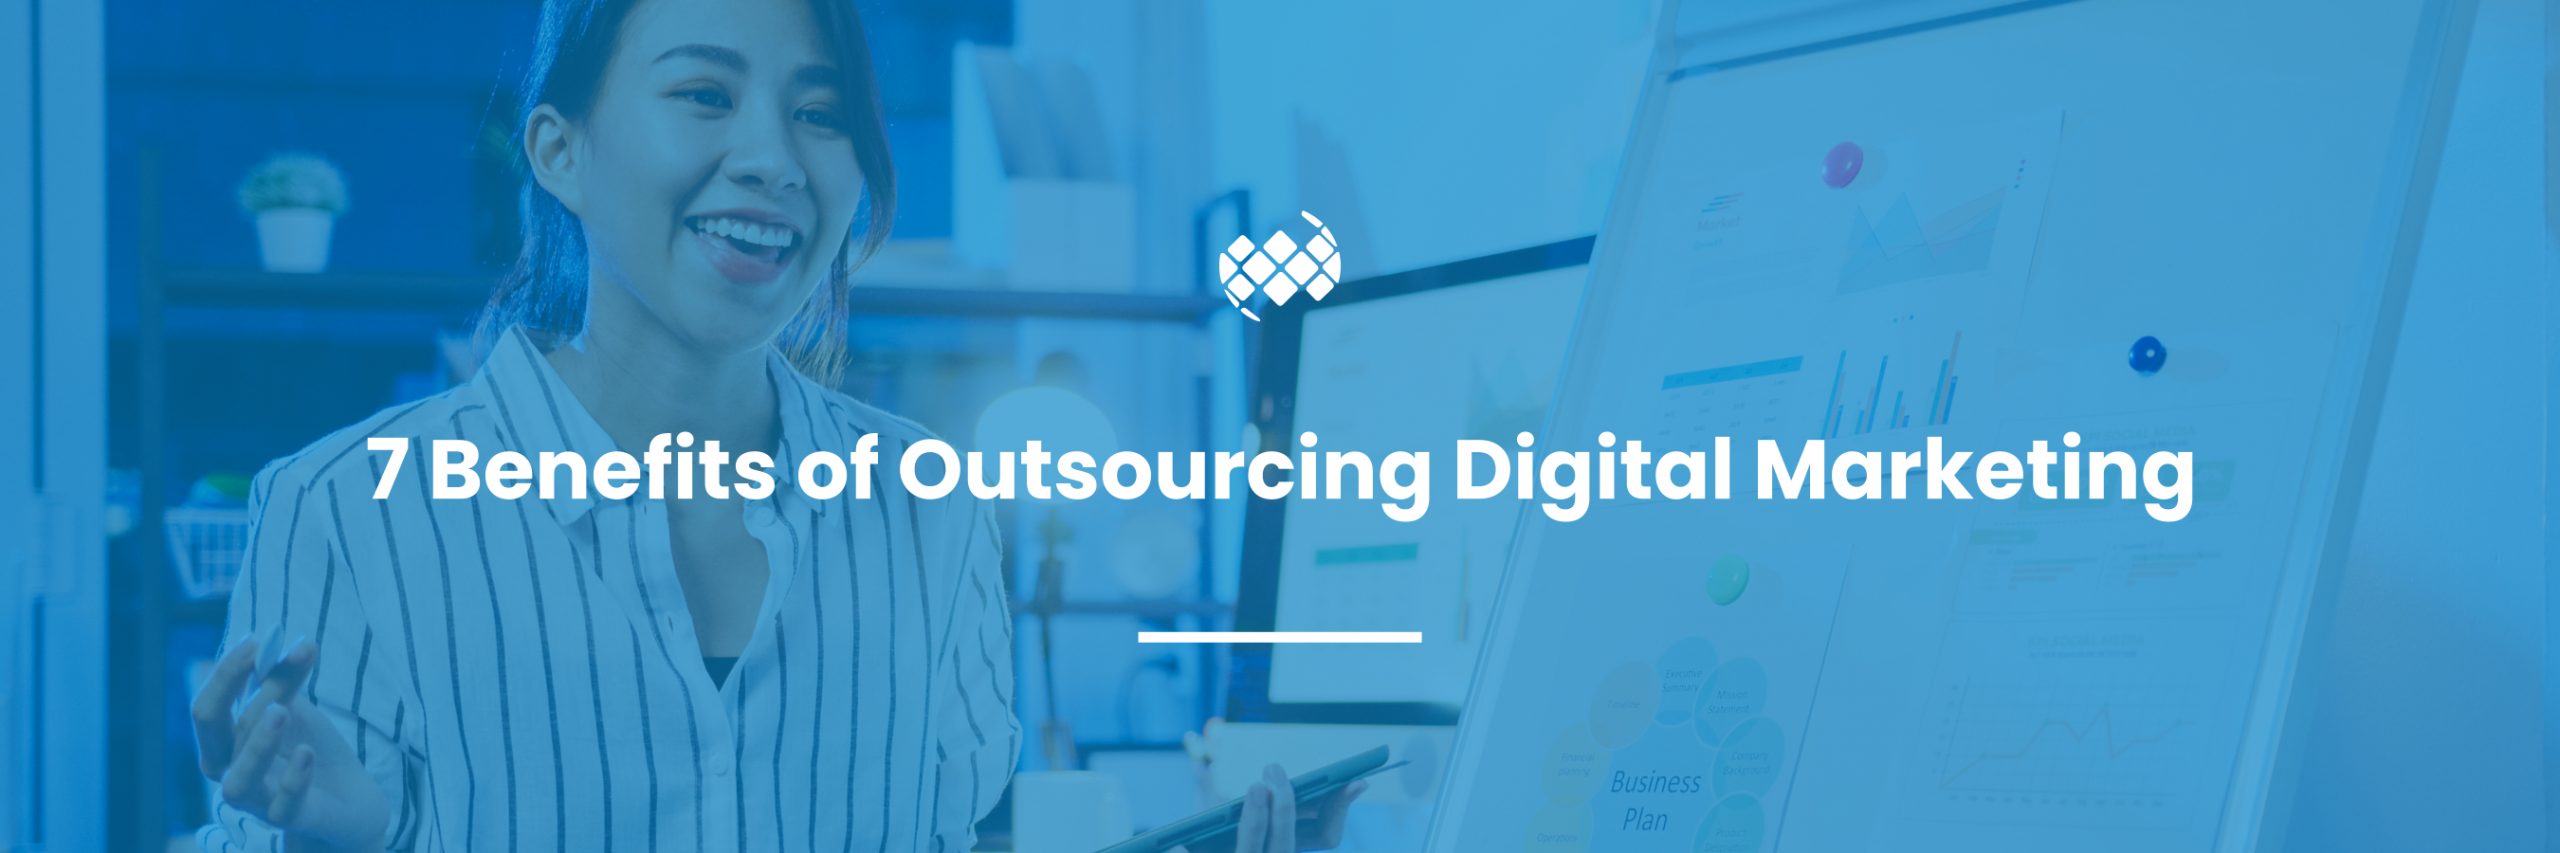 Benefits of Outsourcing Digital Marketing